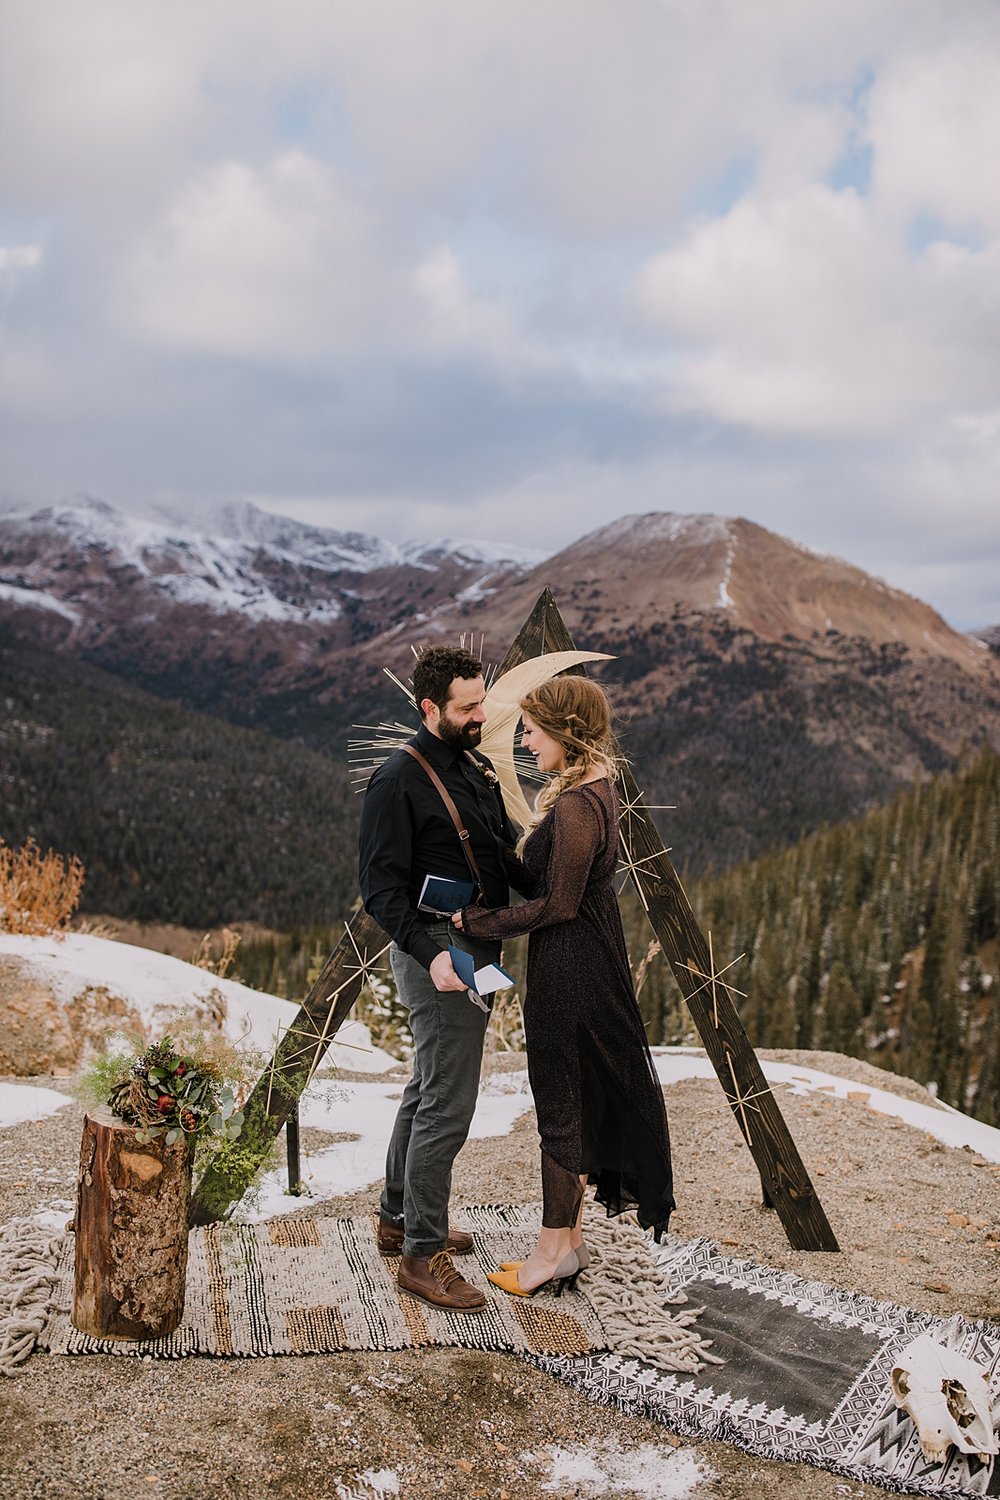 bride and groom reading vows during ceremony, loveland pass wedding, fall mountain elopement, fall mountain wedding, colorado fall wedding, colorado fall elopement, black wedding attire, black dress